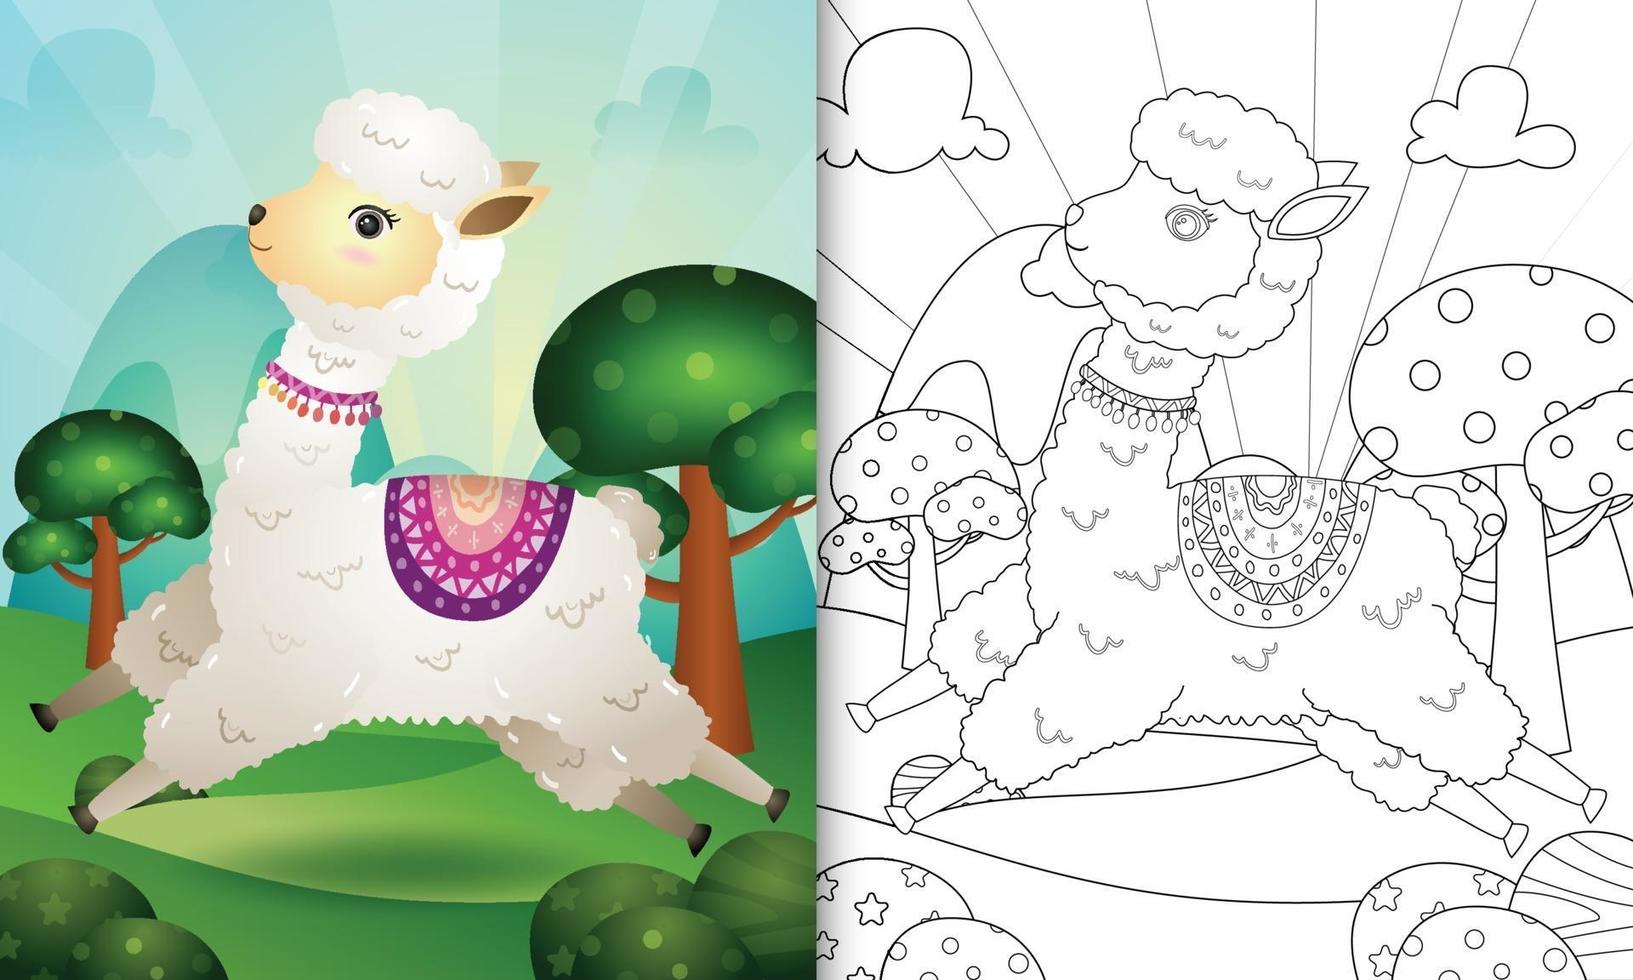 Coloring book for kids with a cute alpaca character illustration vector